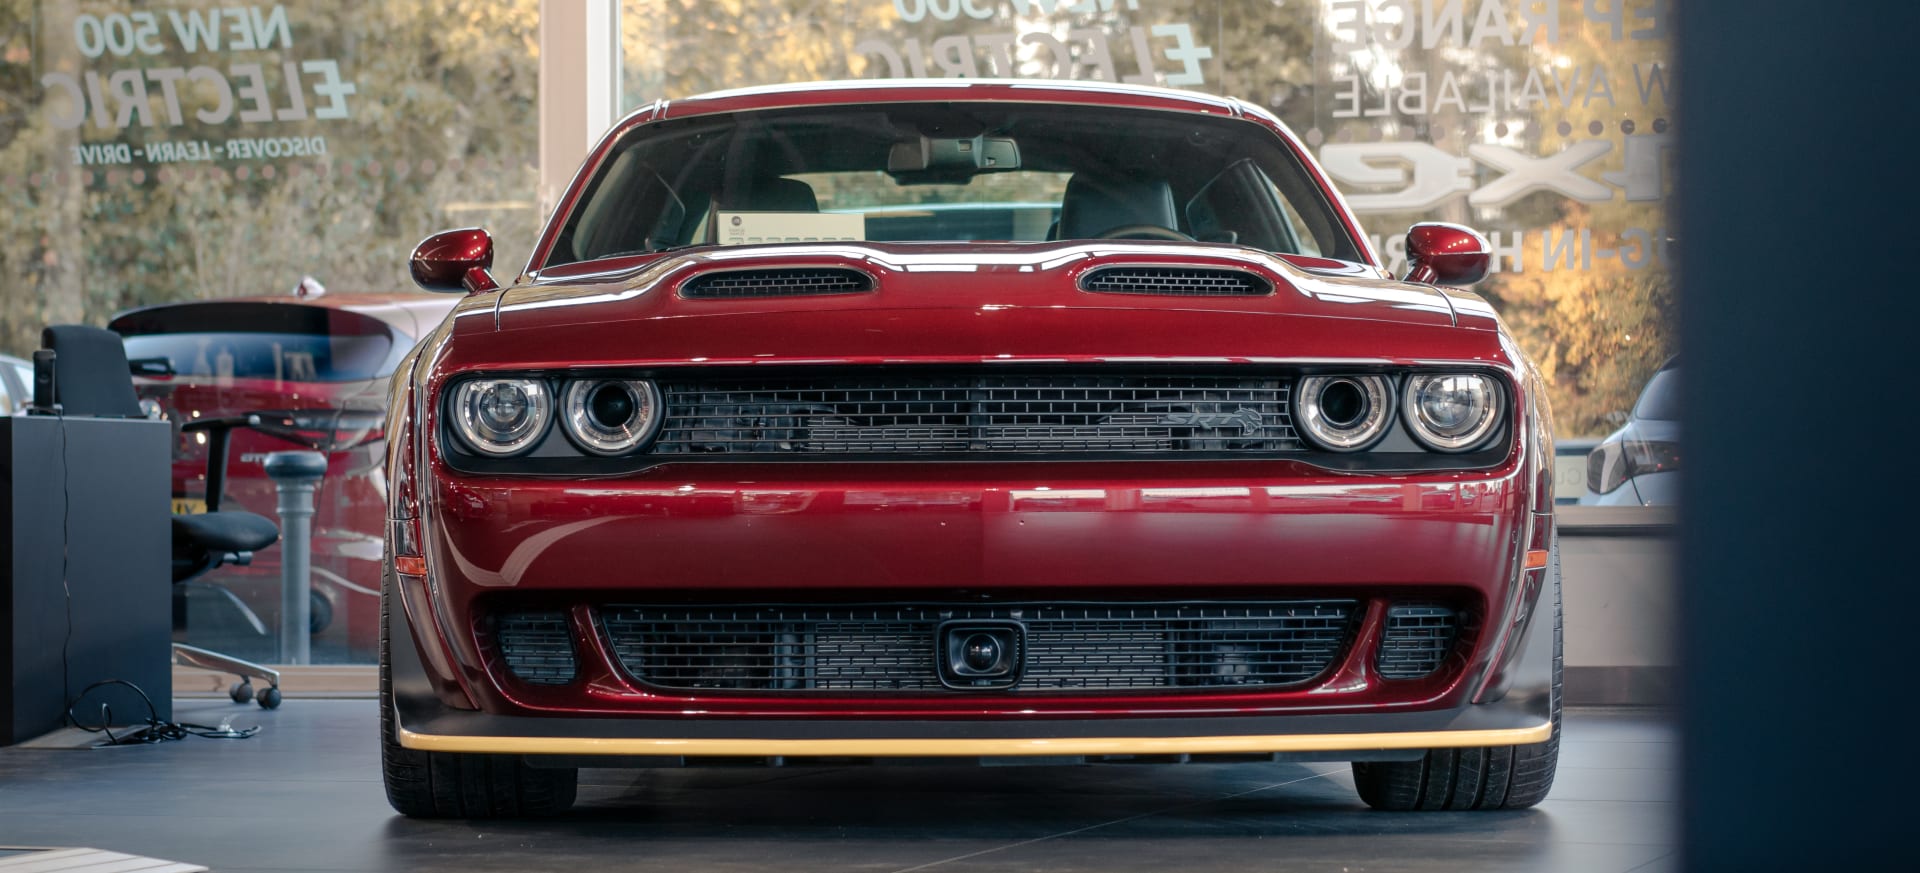 Welcome to the home of Dodge UK